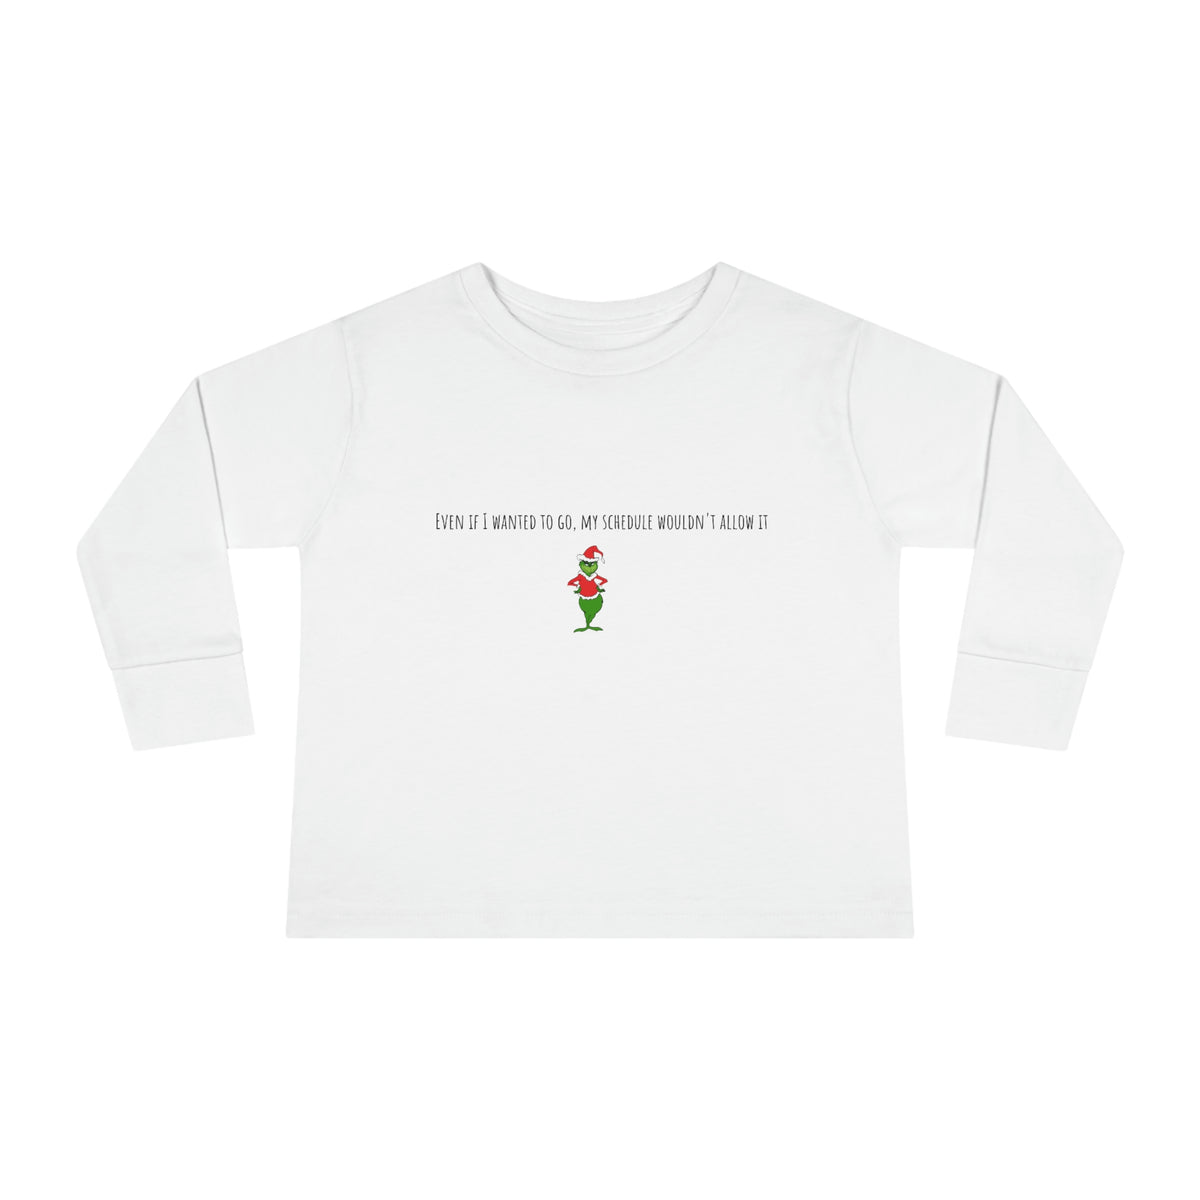 The Grinch Toddler Top, Thats it im not going, Grinch Kids Tops, Funny Grinch Gifts, 2T-6T